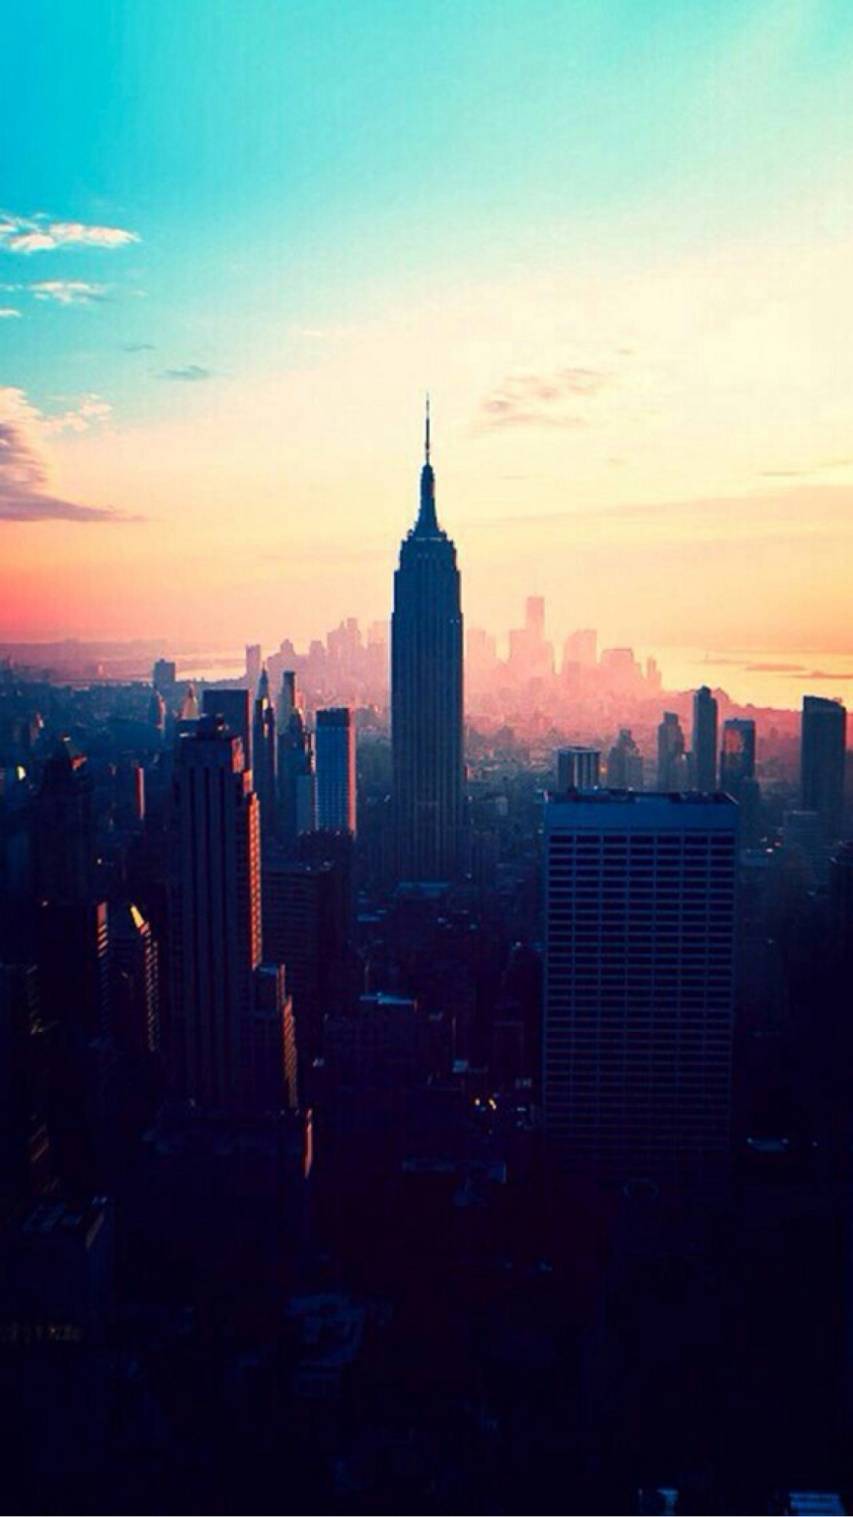 A cityscape of the skyline of New York City at sunset - City